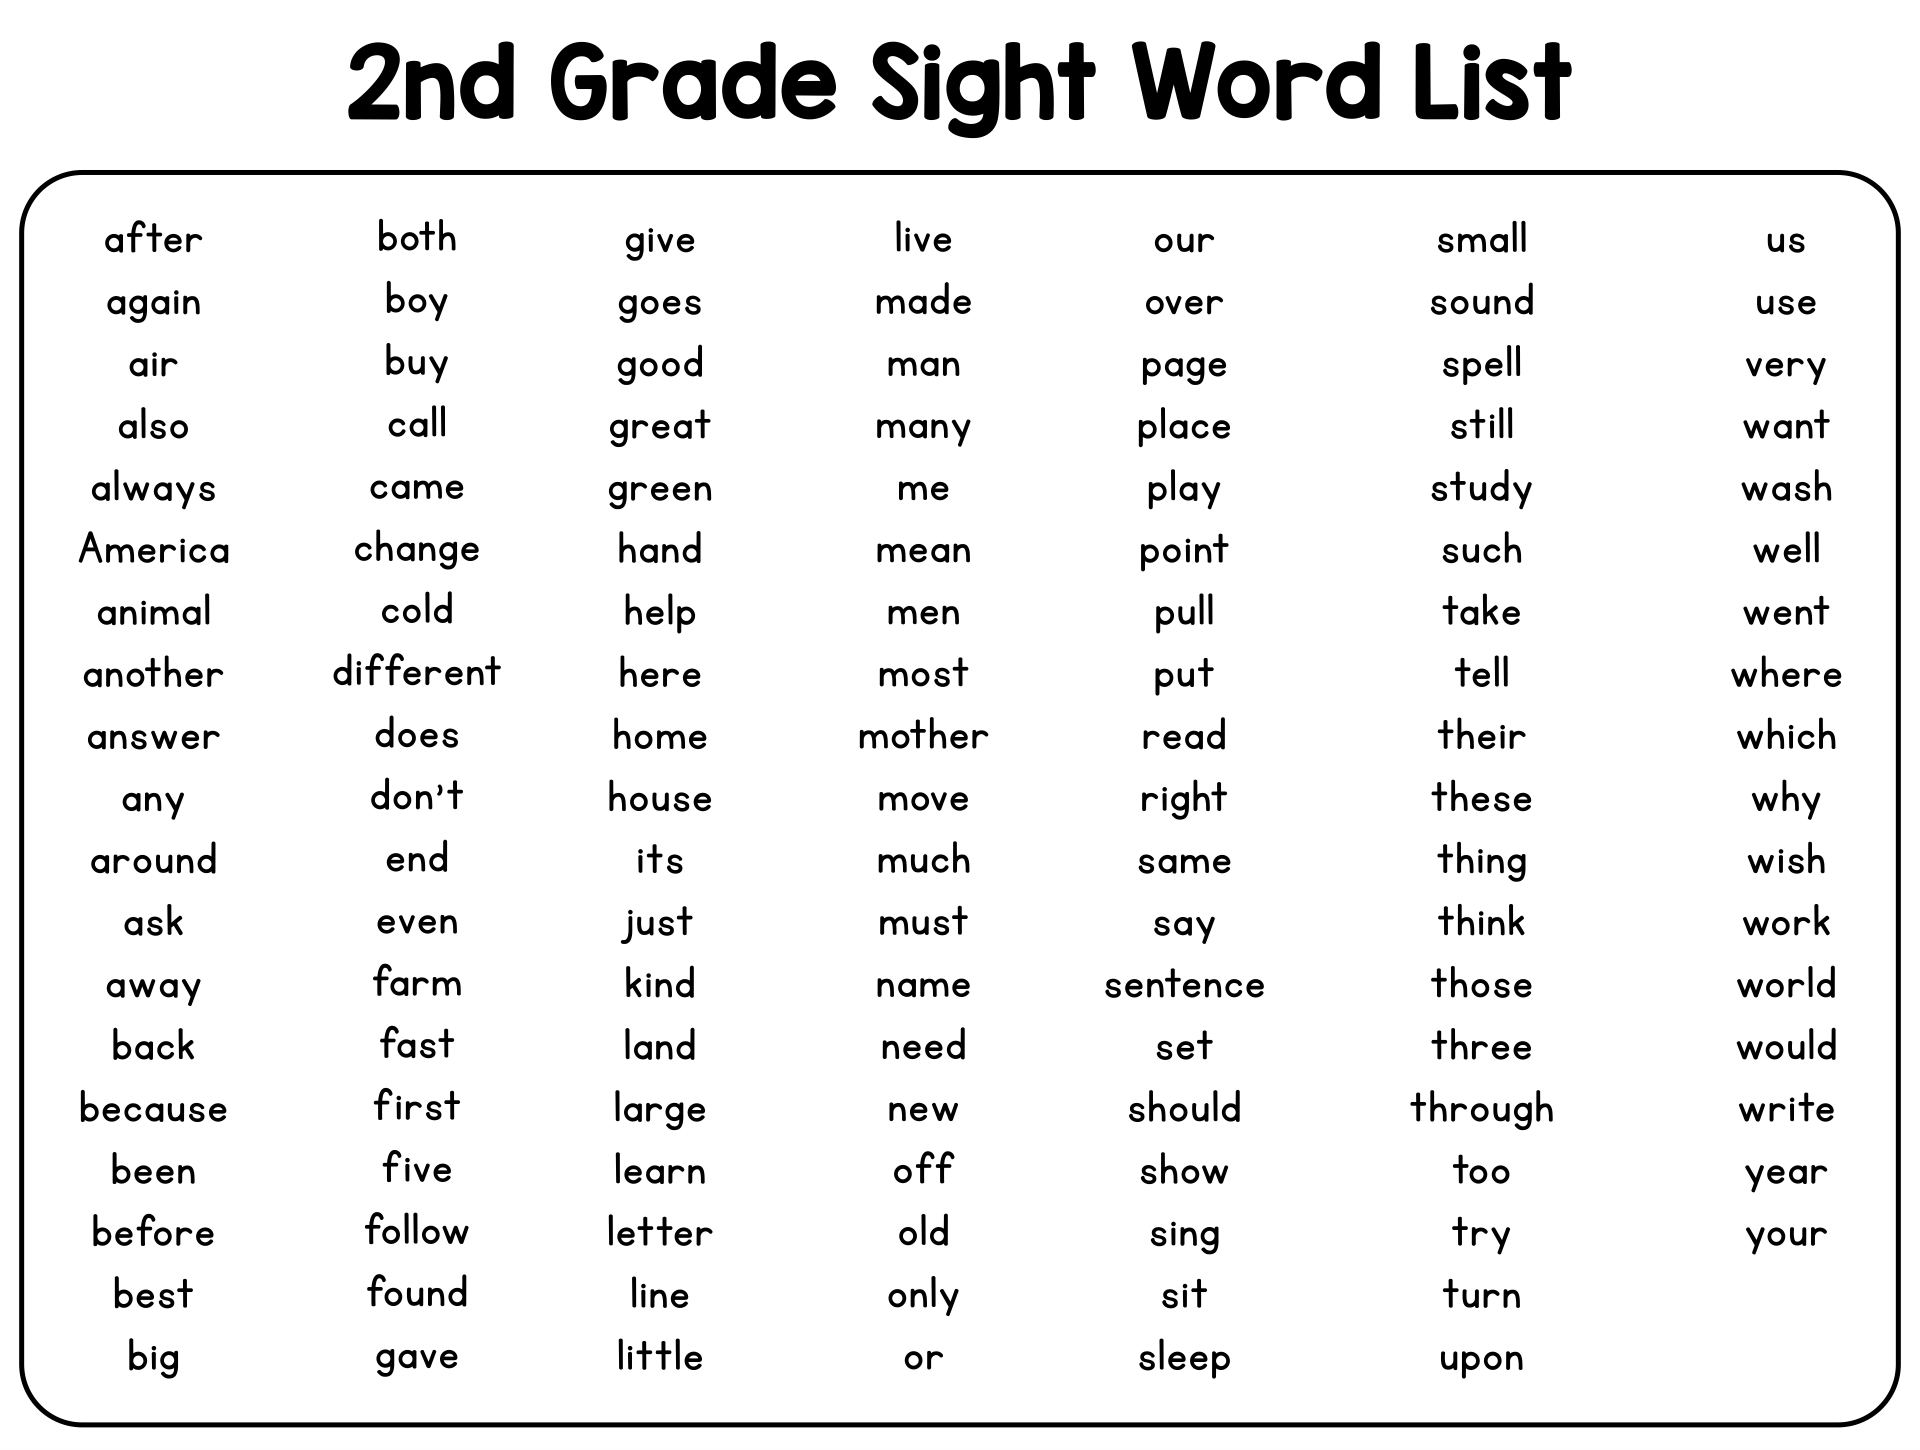 5-best-images-of-second-grade-sight-words-printable-2nd-grade-sight